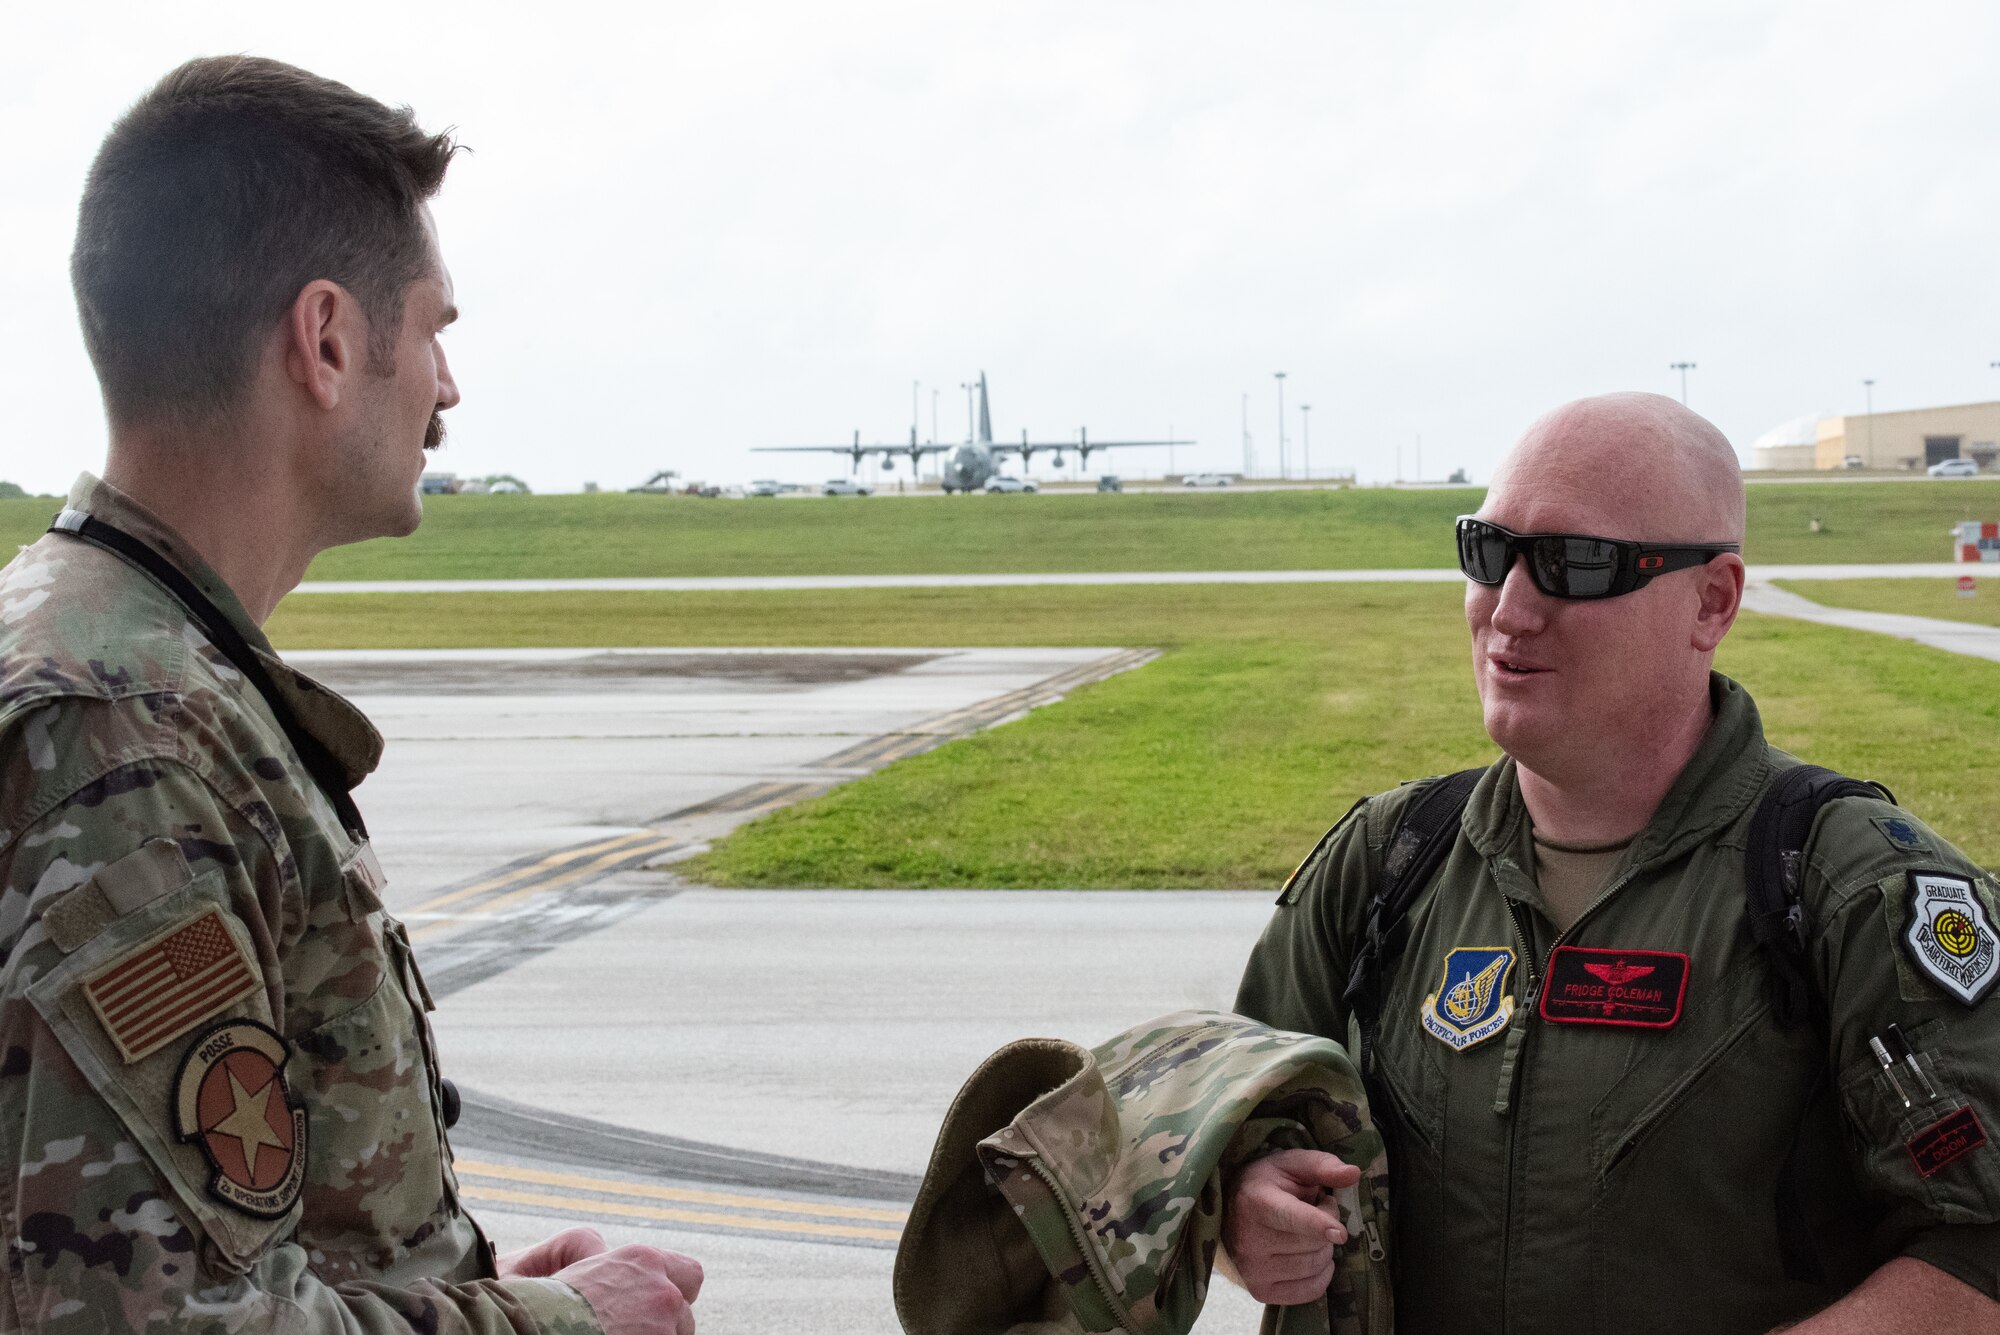 Lt. Col. Christopher Coleman, 96th Expeditionary Bomb Squadron commander, is greeted by Maj. Kris Souza, 96th EBS director of operations, during a Bomber Task Force deployment at Andersen Air Force Base, Guam, Feb. 9th, 2022. BTF deployments enhance readiness to respond to any potential crisis or challenge in the Indo-Pacific. (U.S. Air Force photo by Senior Airman Jonathan E. Ramos)